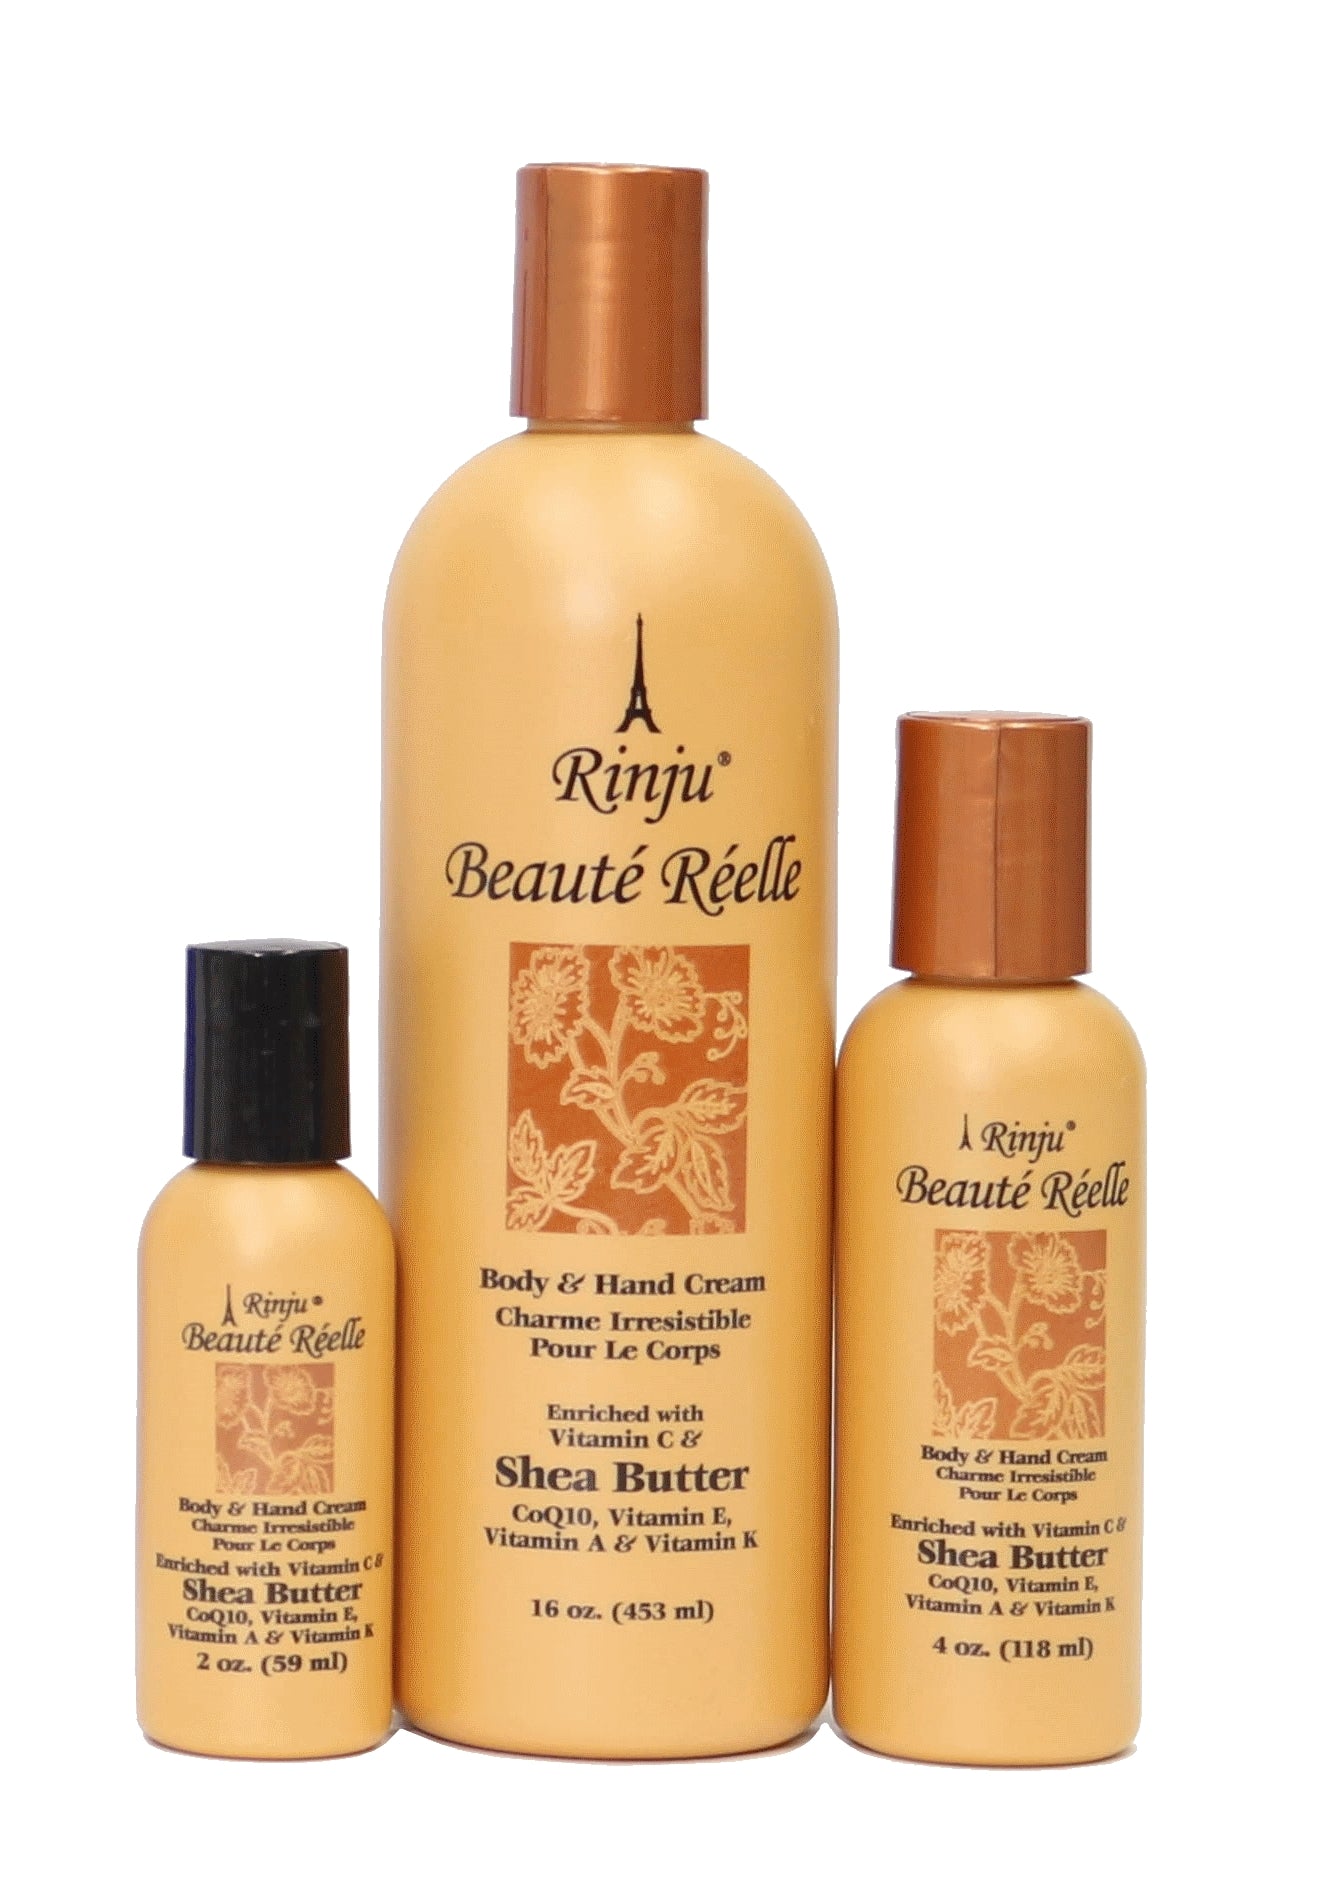 Rinju Beaute Reelle Body and Hand Lotion